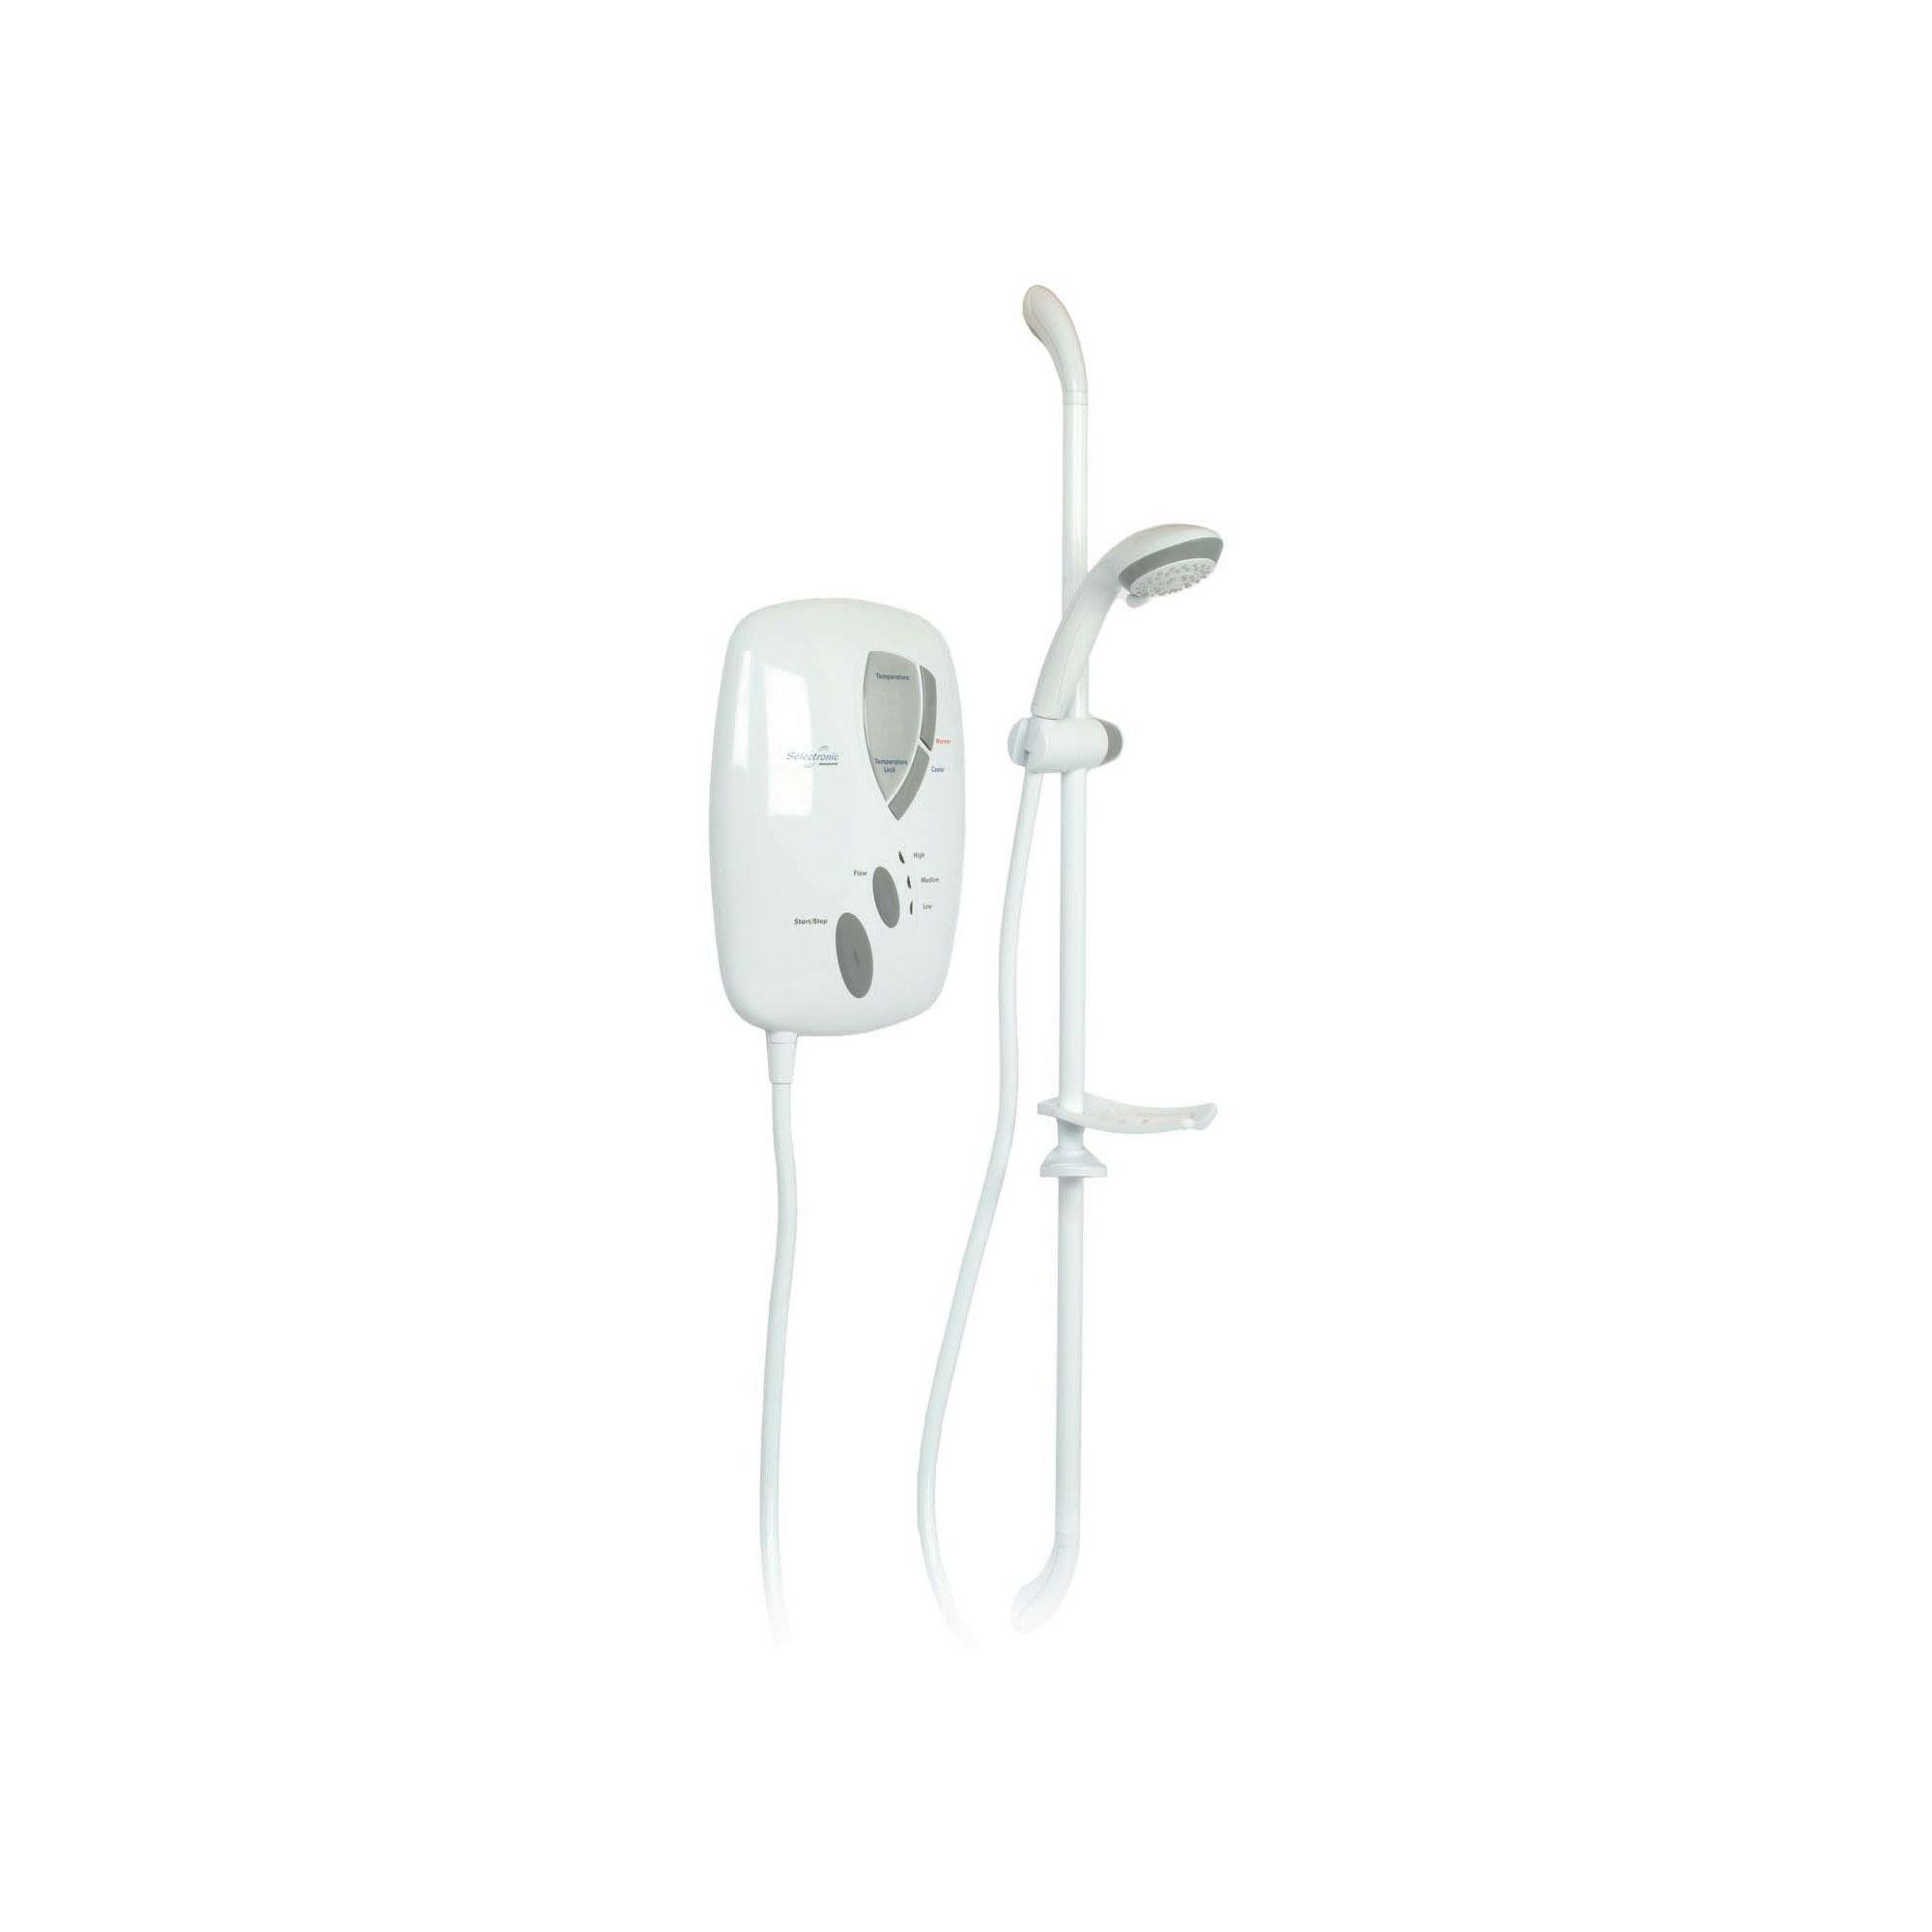 Redring Selectronic Plus 8.5kW Electric Shower at Tesco Direct